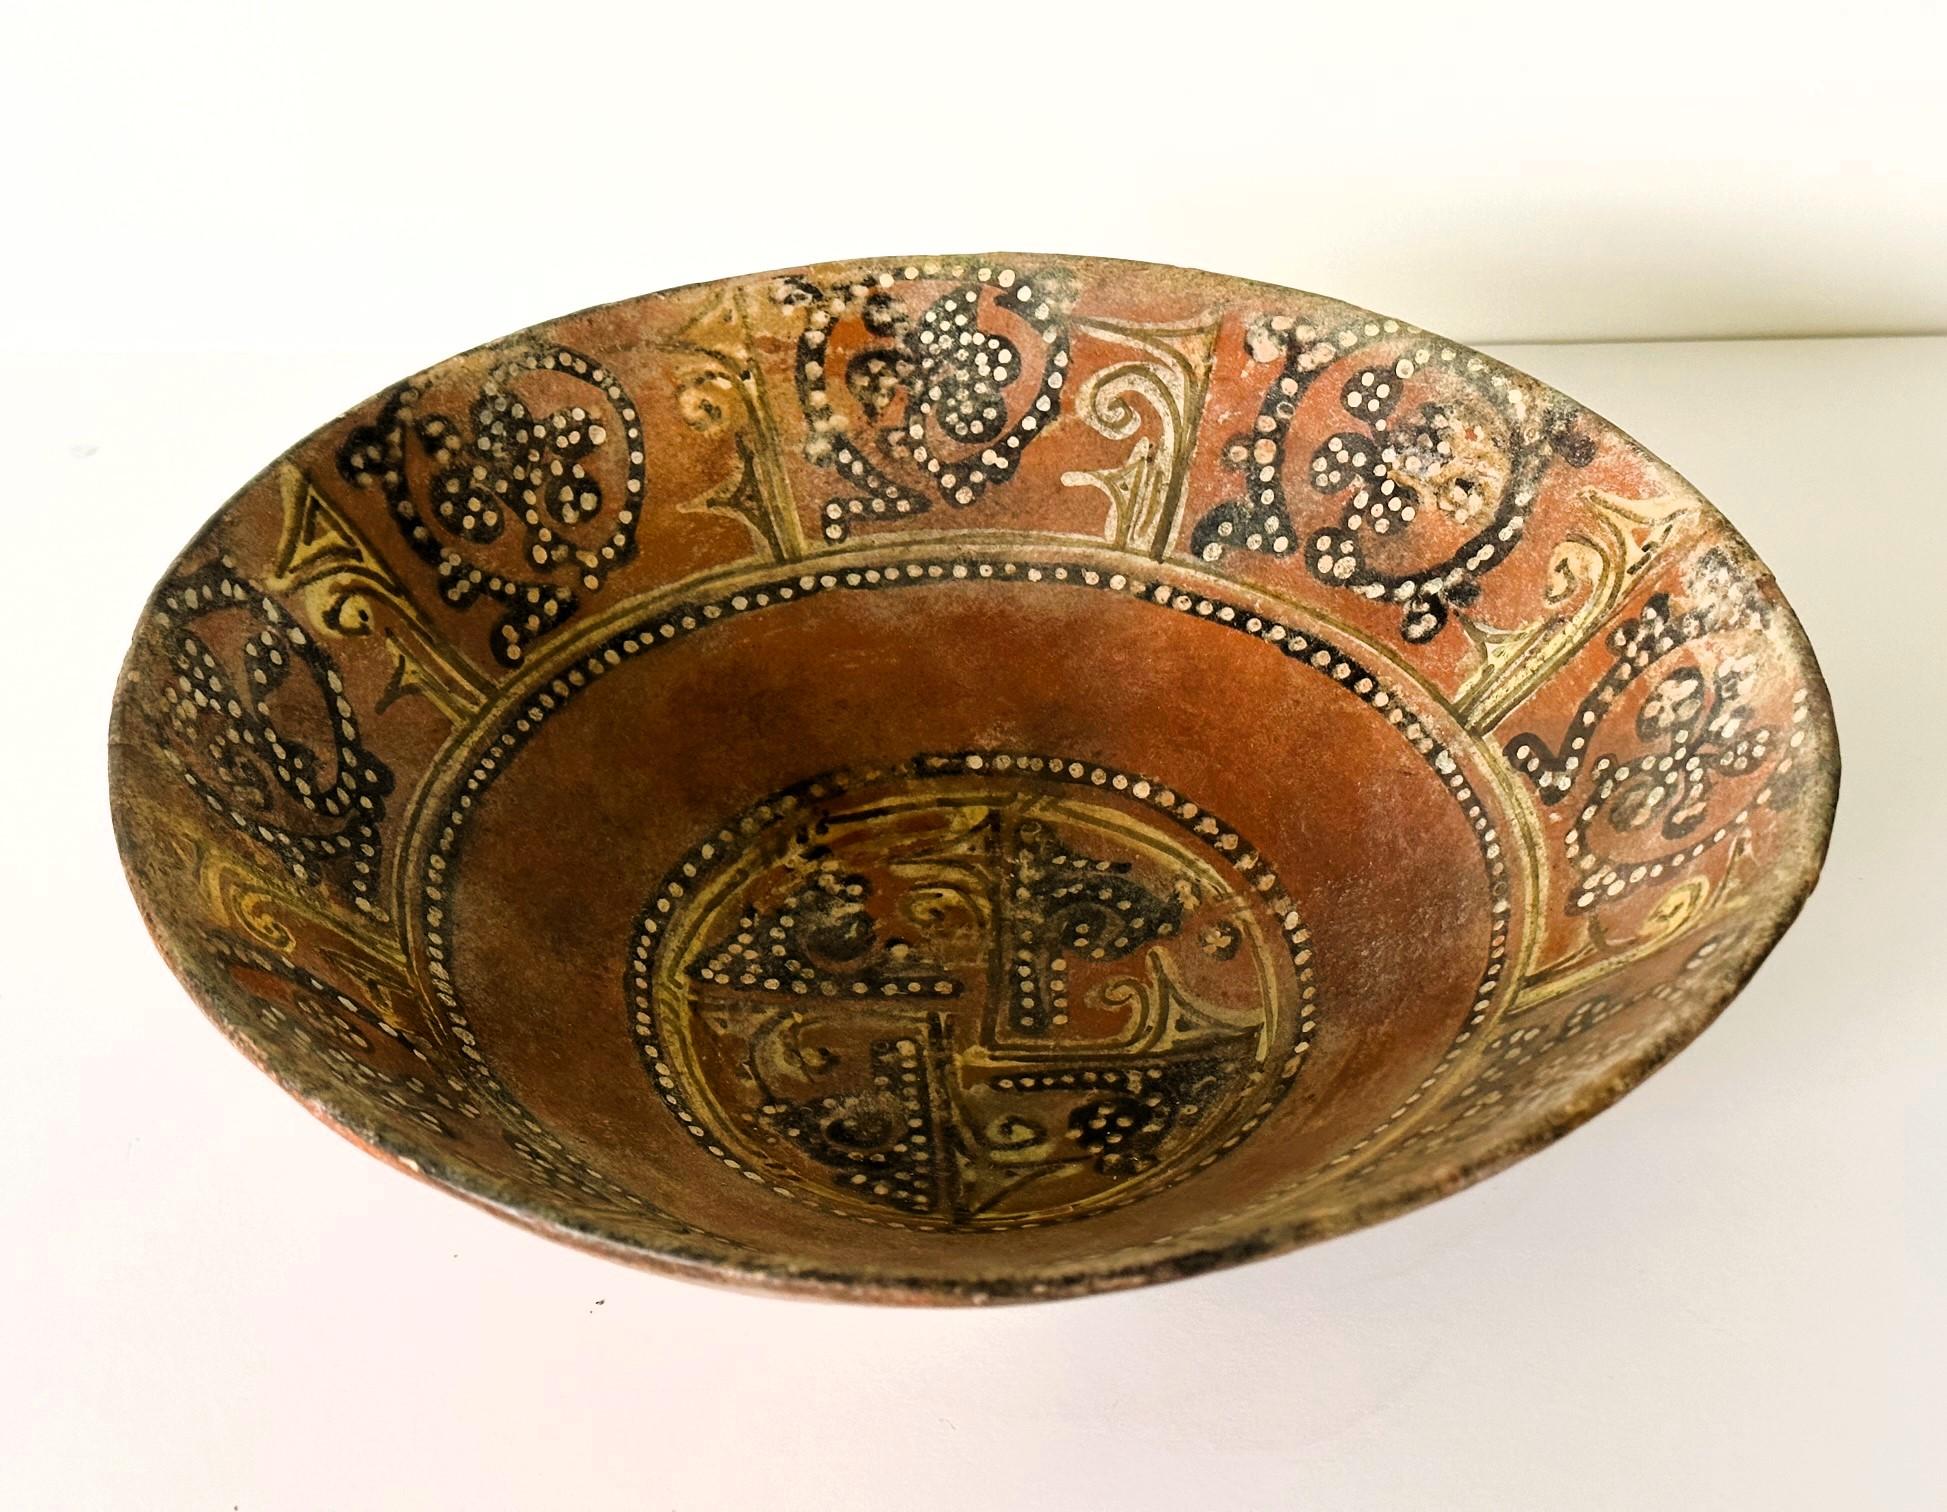 A deep and wide earthenware bowl supported on a foot ring decorated with slip paint from Nishapur 11th century under the Seljuk Empire (in nowadays Iran). This bowl features a thinly pottered wall covered in an ocher color slip background. On top of